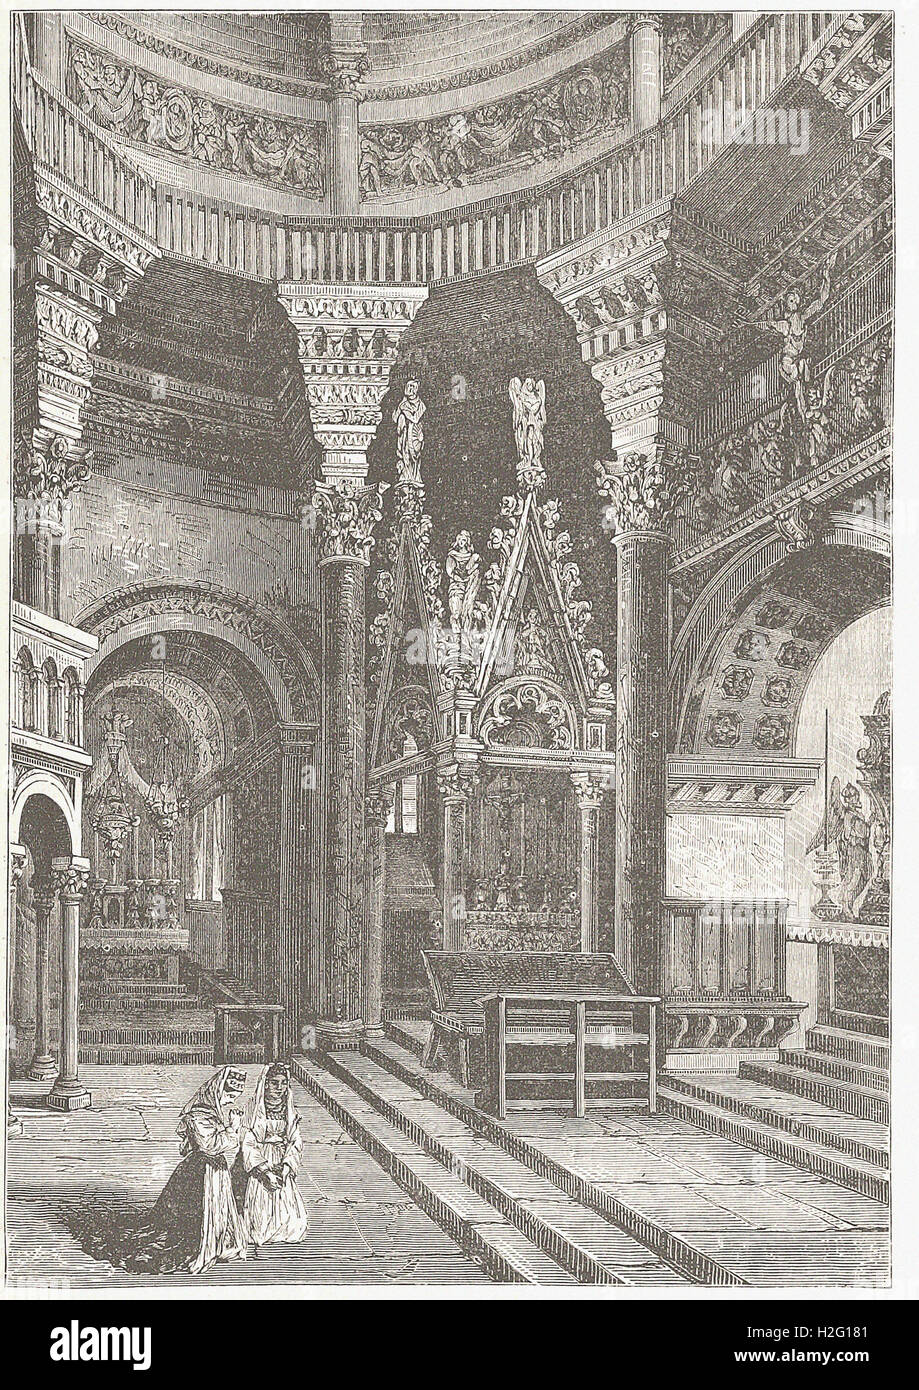 INTERIOR OF THE CATHEDRAL OF SPALATRO (FORMERLY THE TEMPLE OF THE PALACE OF DIOCLETIAN - from 'Cassell's Illustrated Universal History' - 1882 Stock Photo